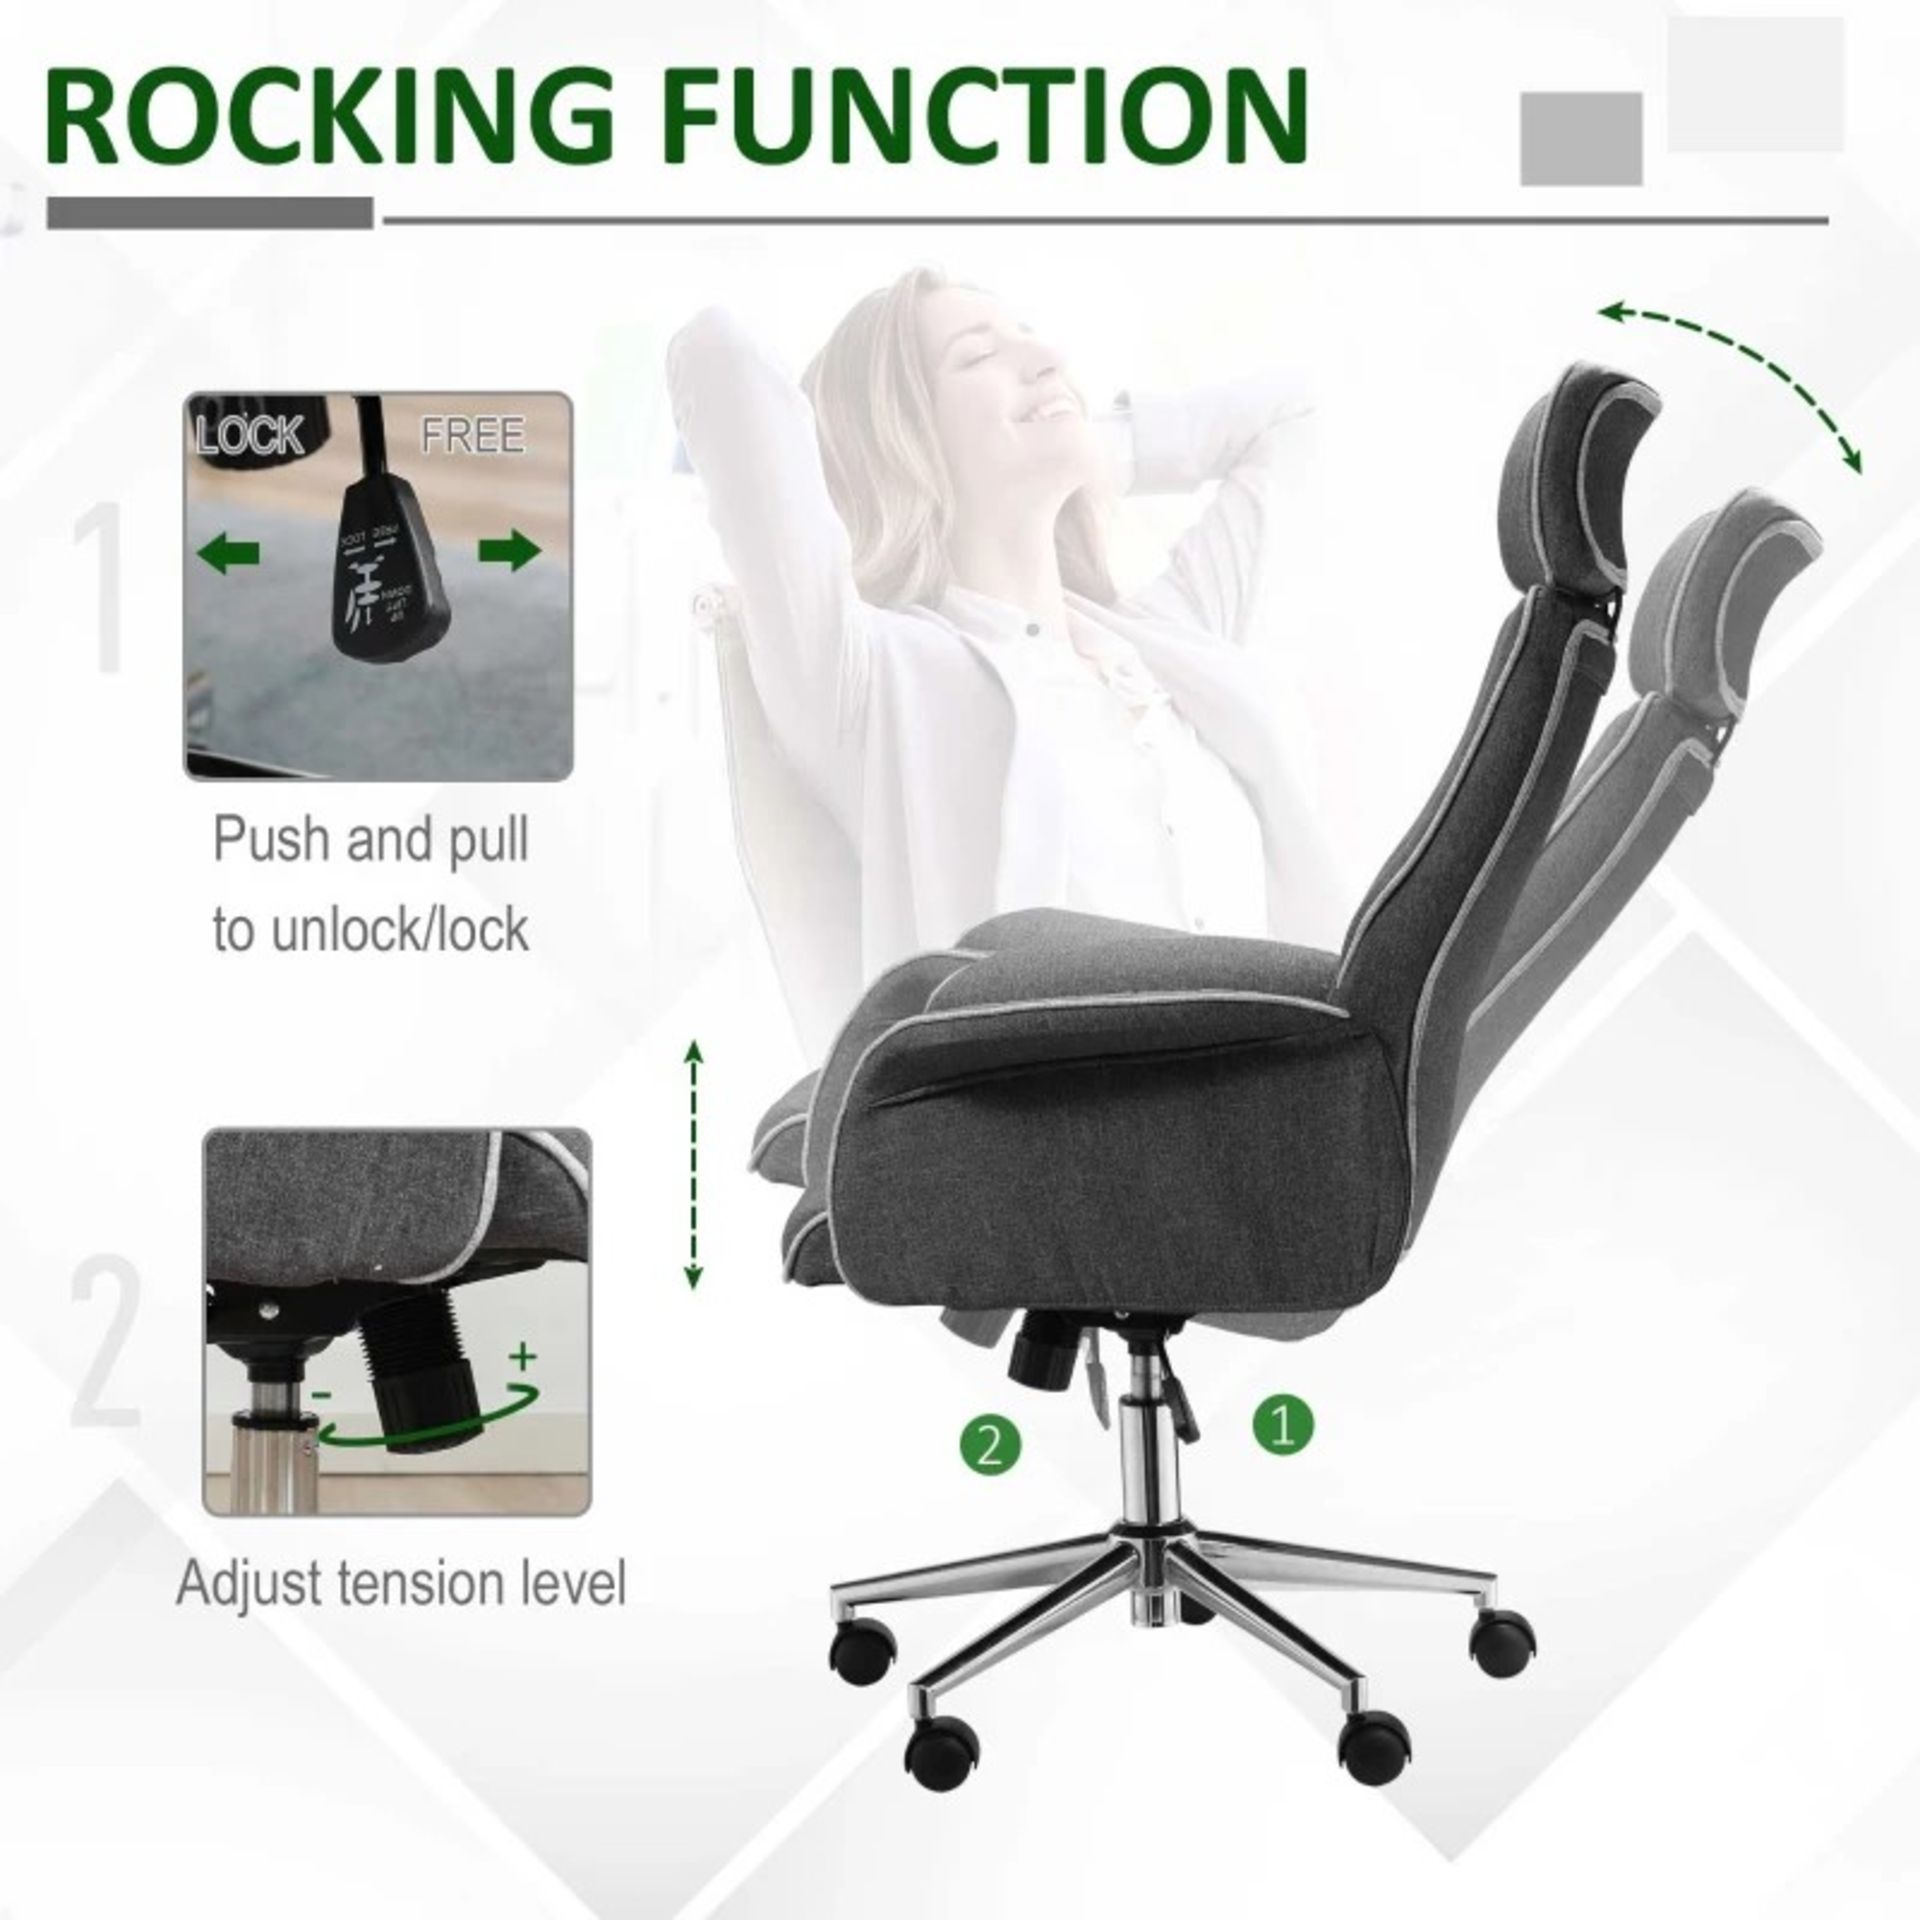 RRP £109.99 - Vinsetto Desk Rocking Chair for Office Executive Adjustable High Back on Wheels Grey - Image 3 of 4